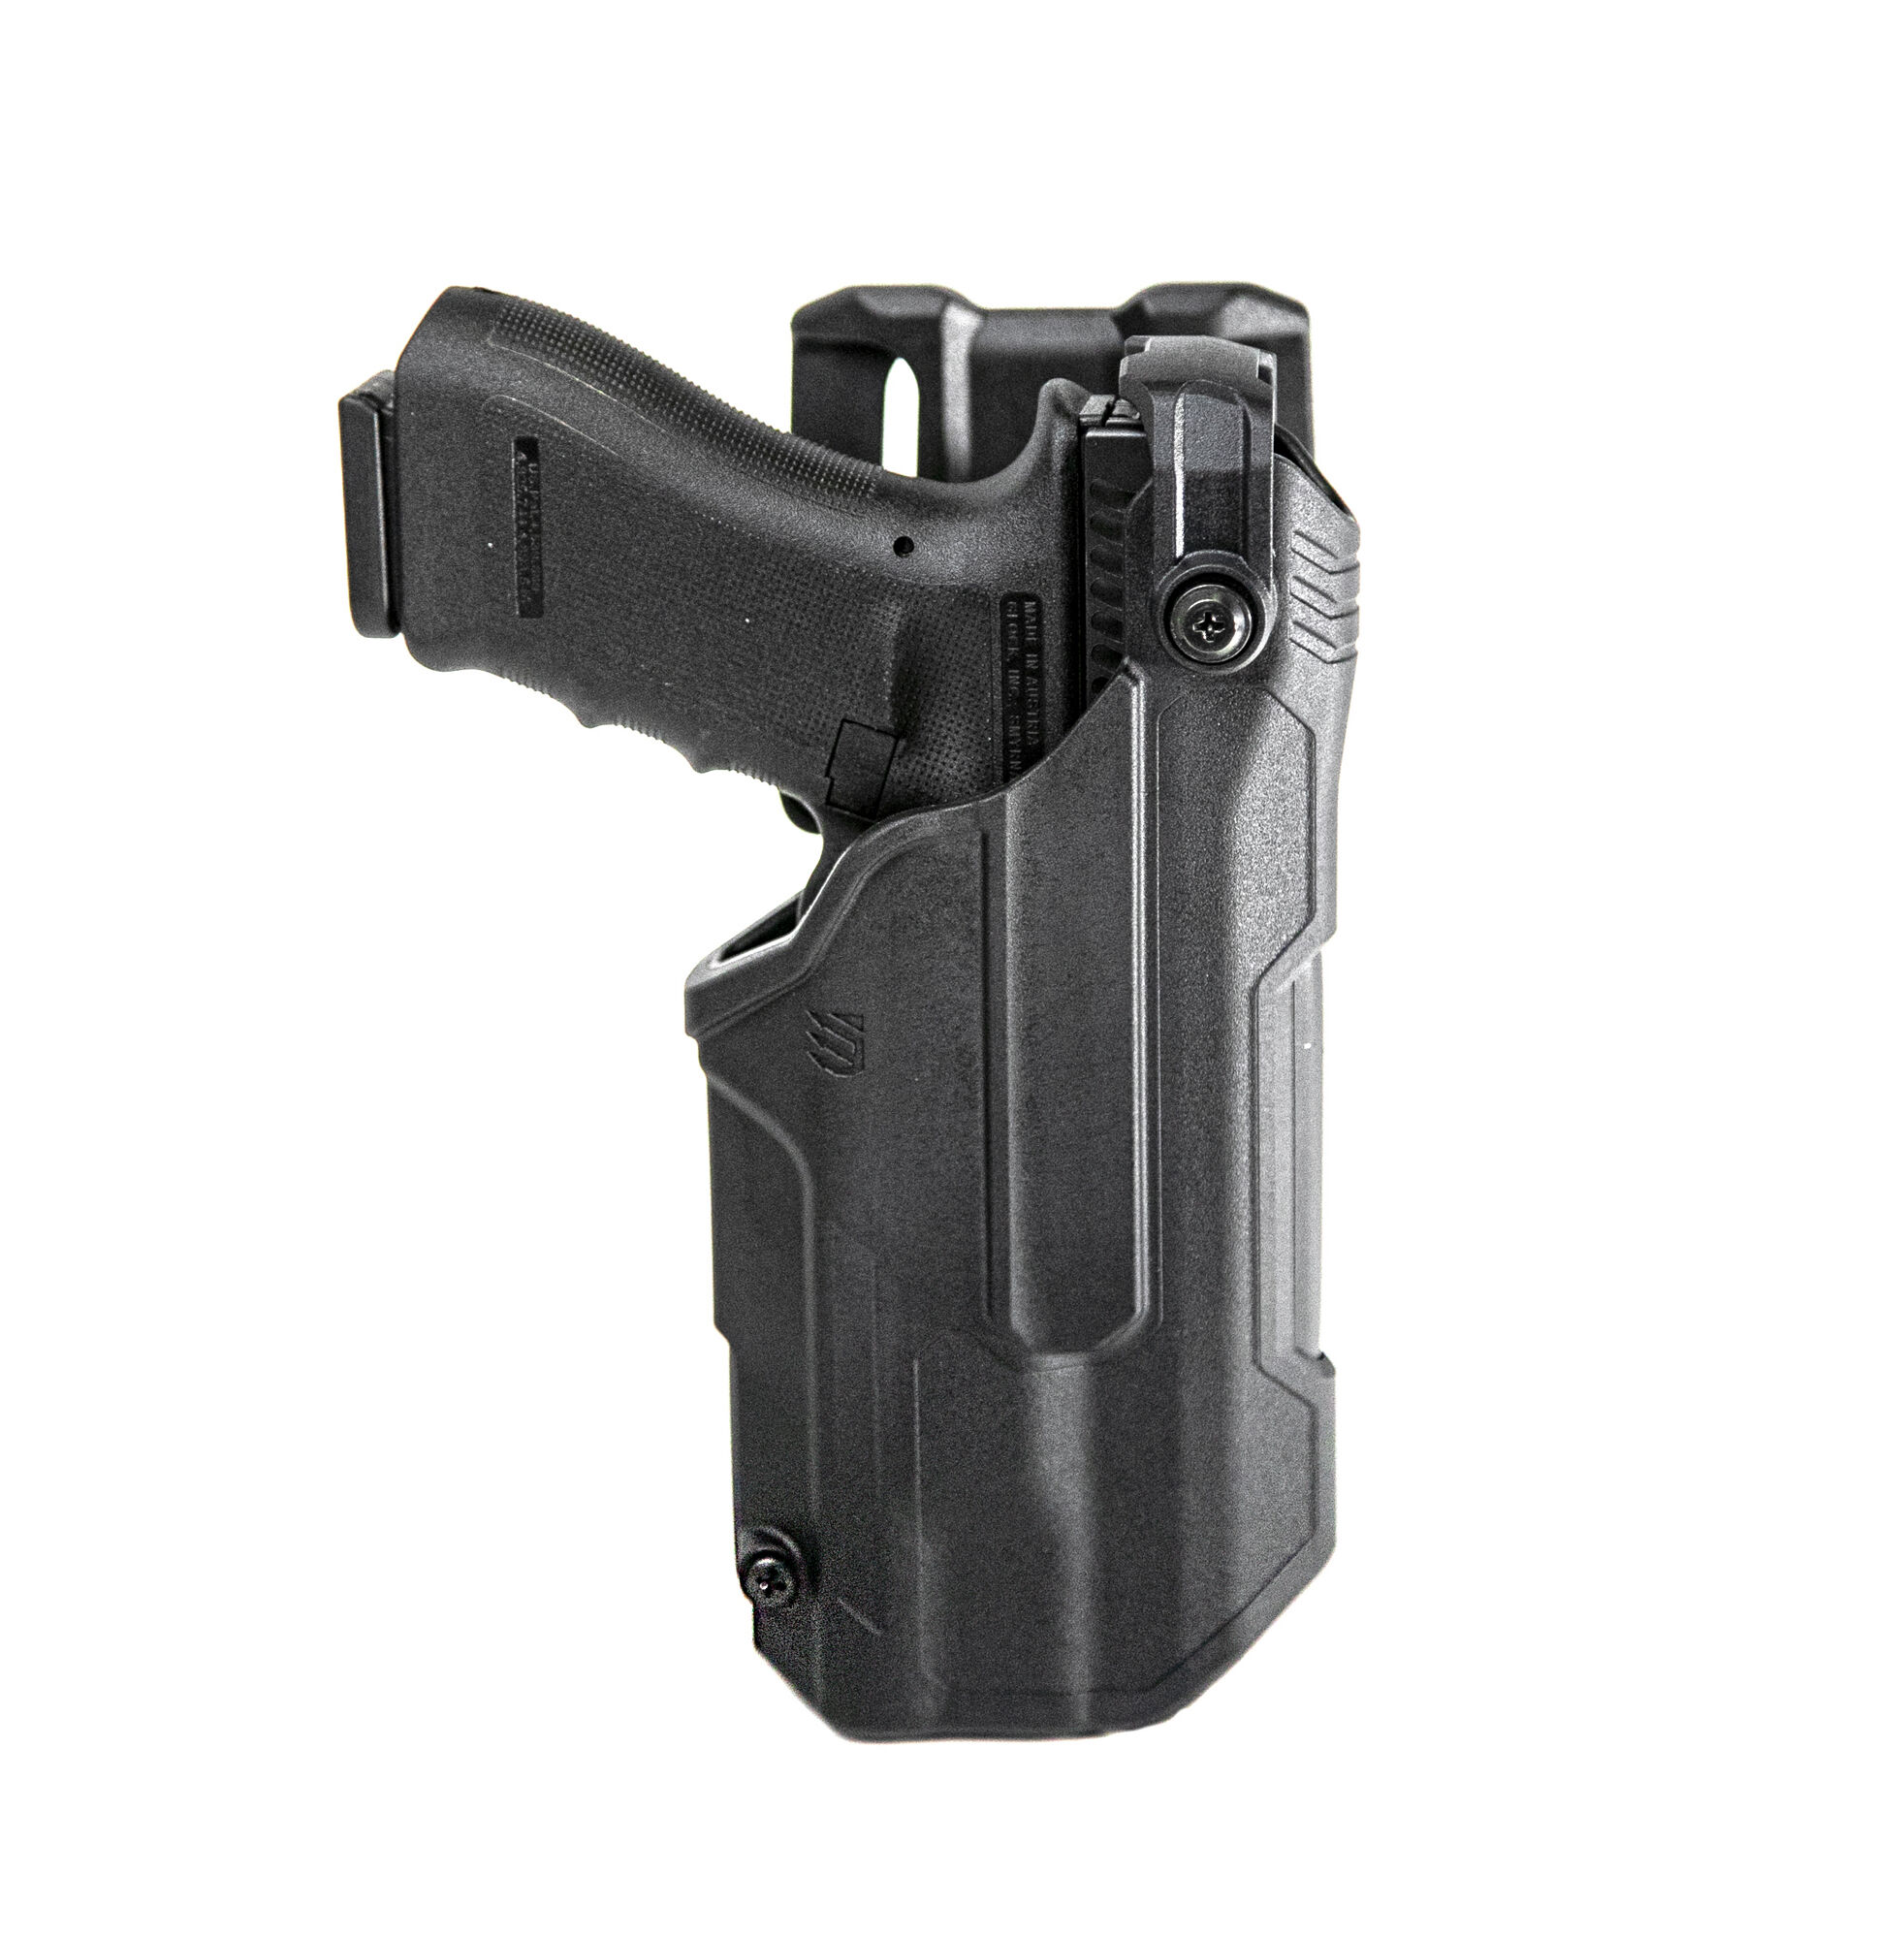 Uncle Mike's RH Holster for Glock 17,19,22,23,24,26,27,31,32,33,34,35,37,38,39 